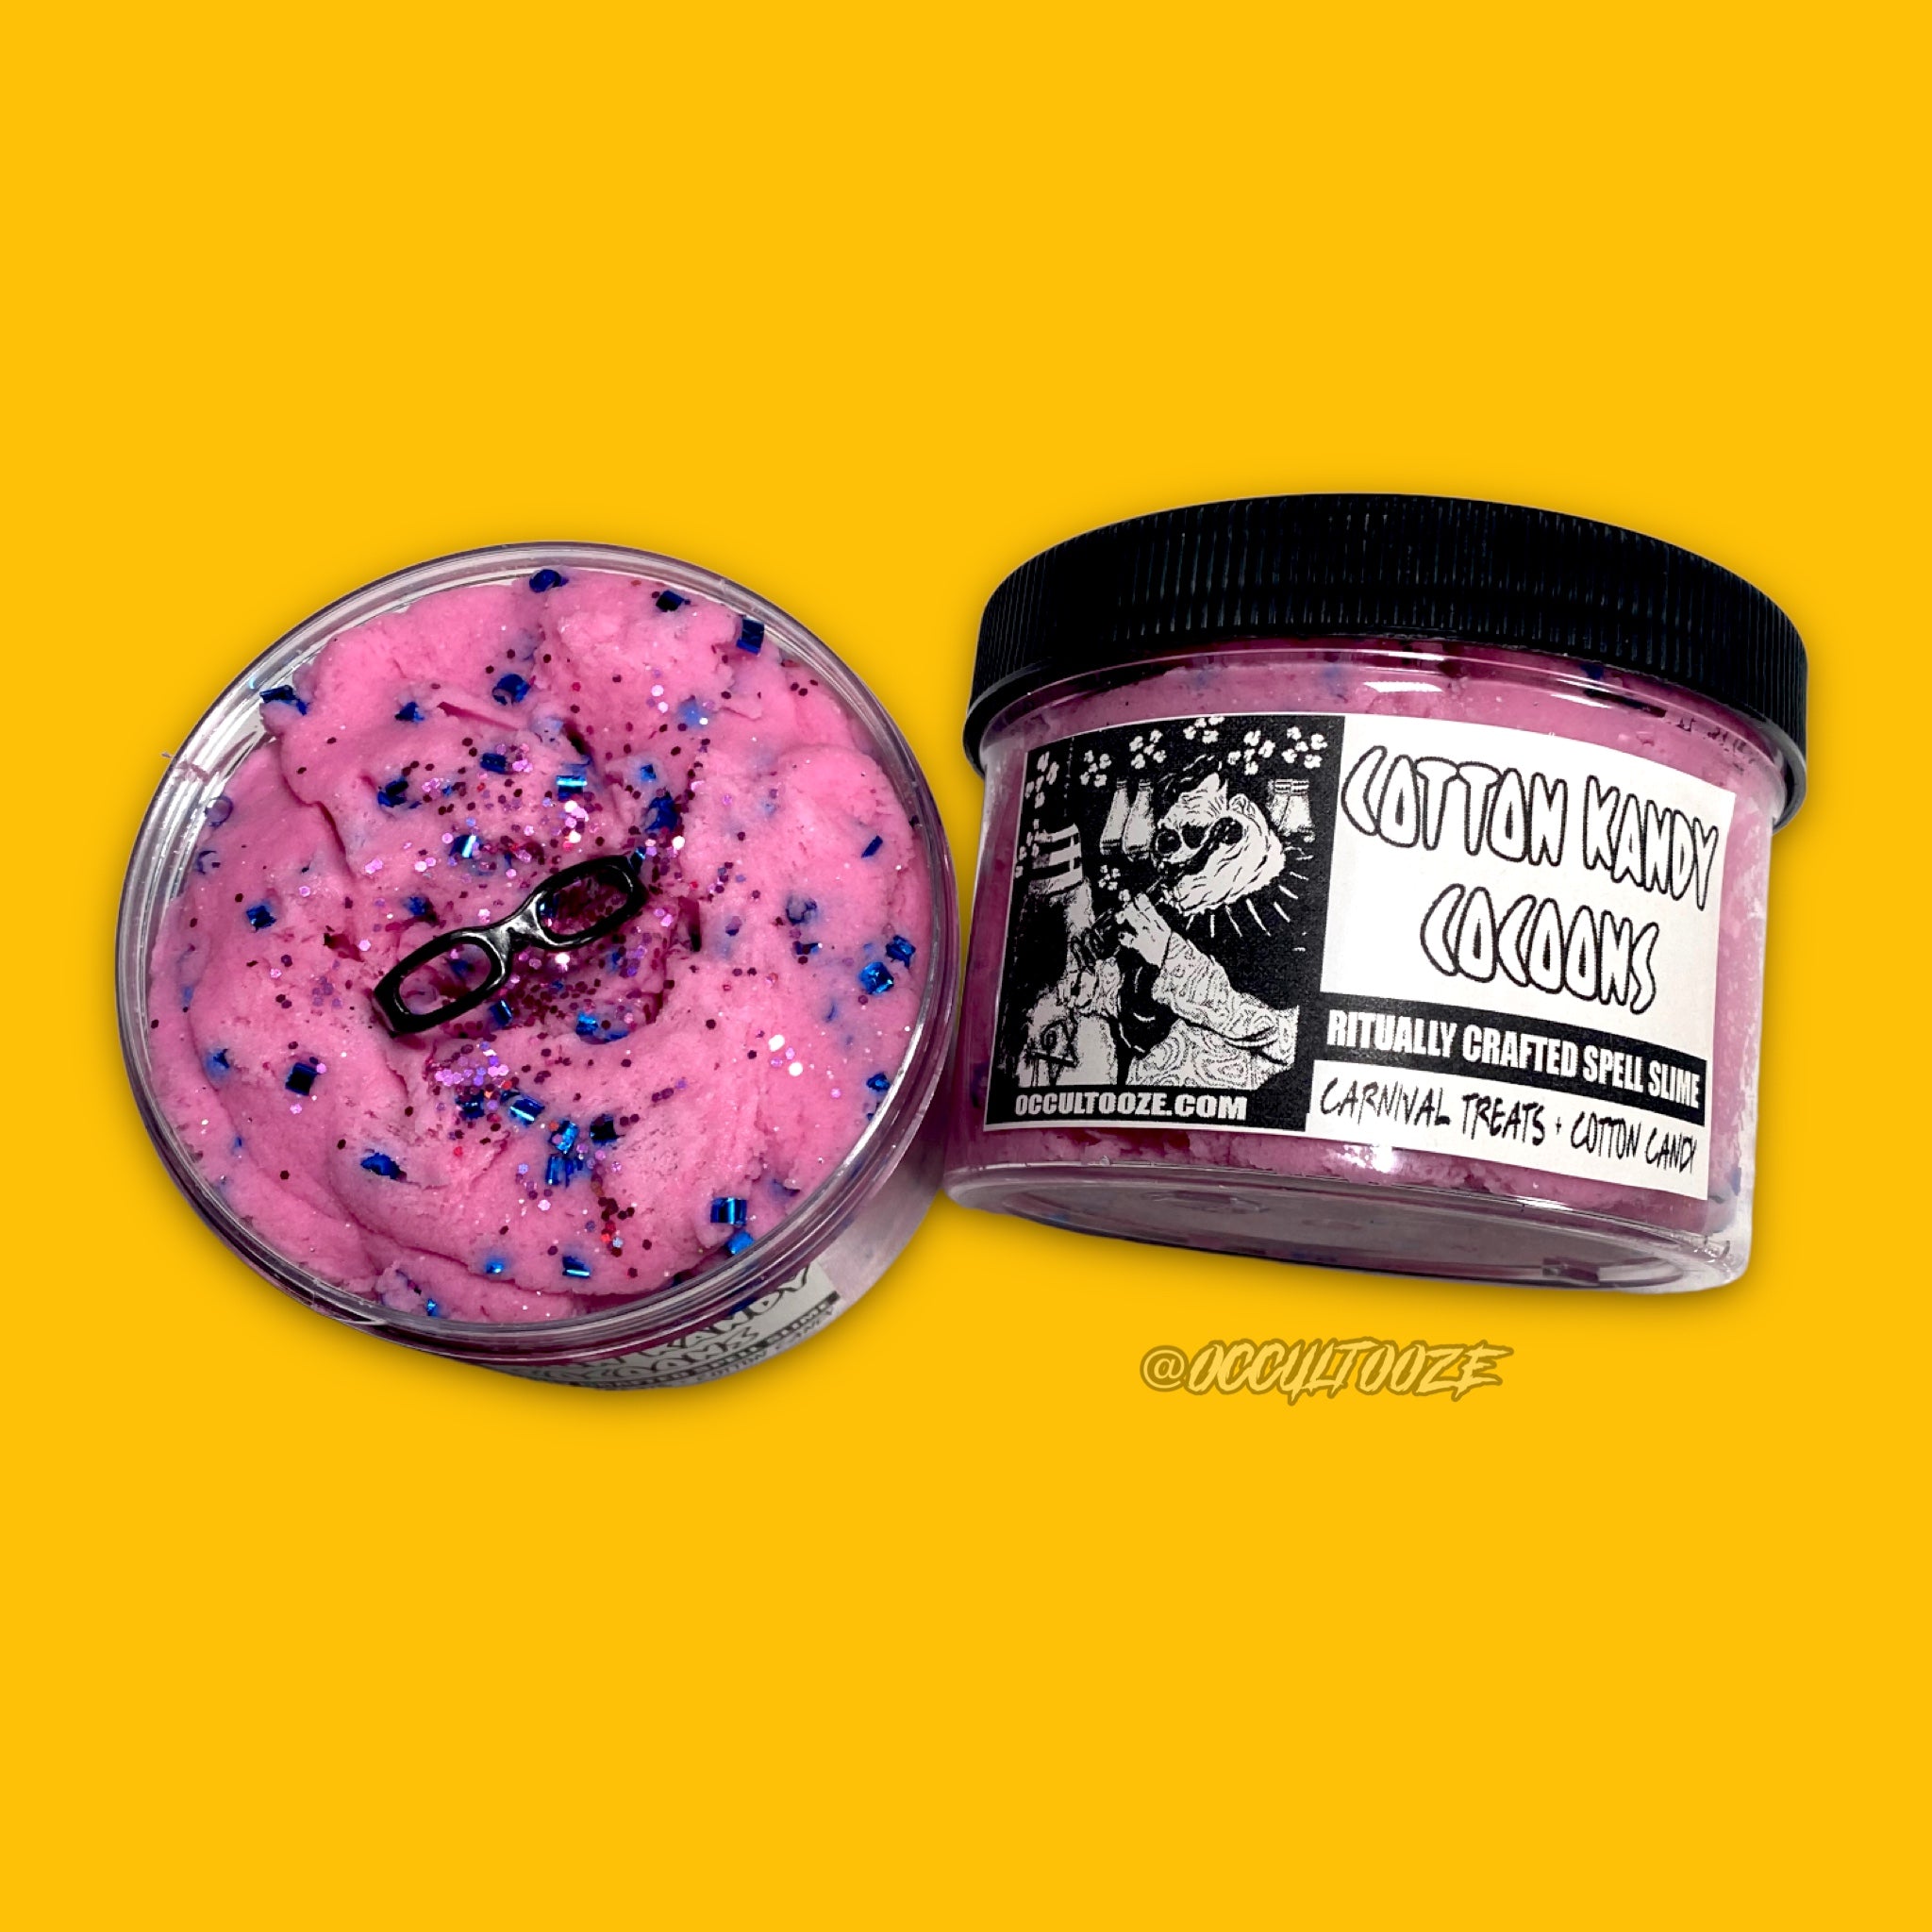 Occult Ooze | Spell Slime l Cotton kandy cocoons